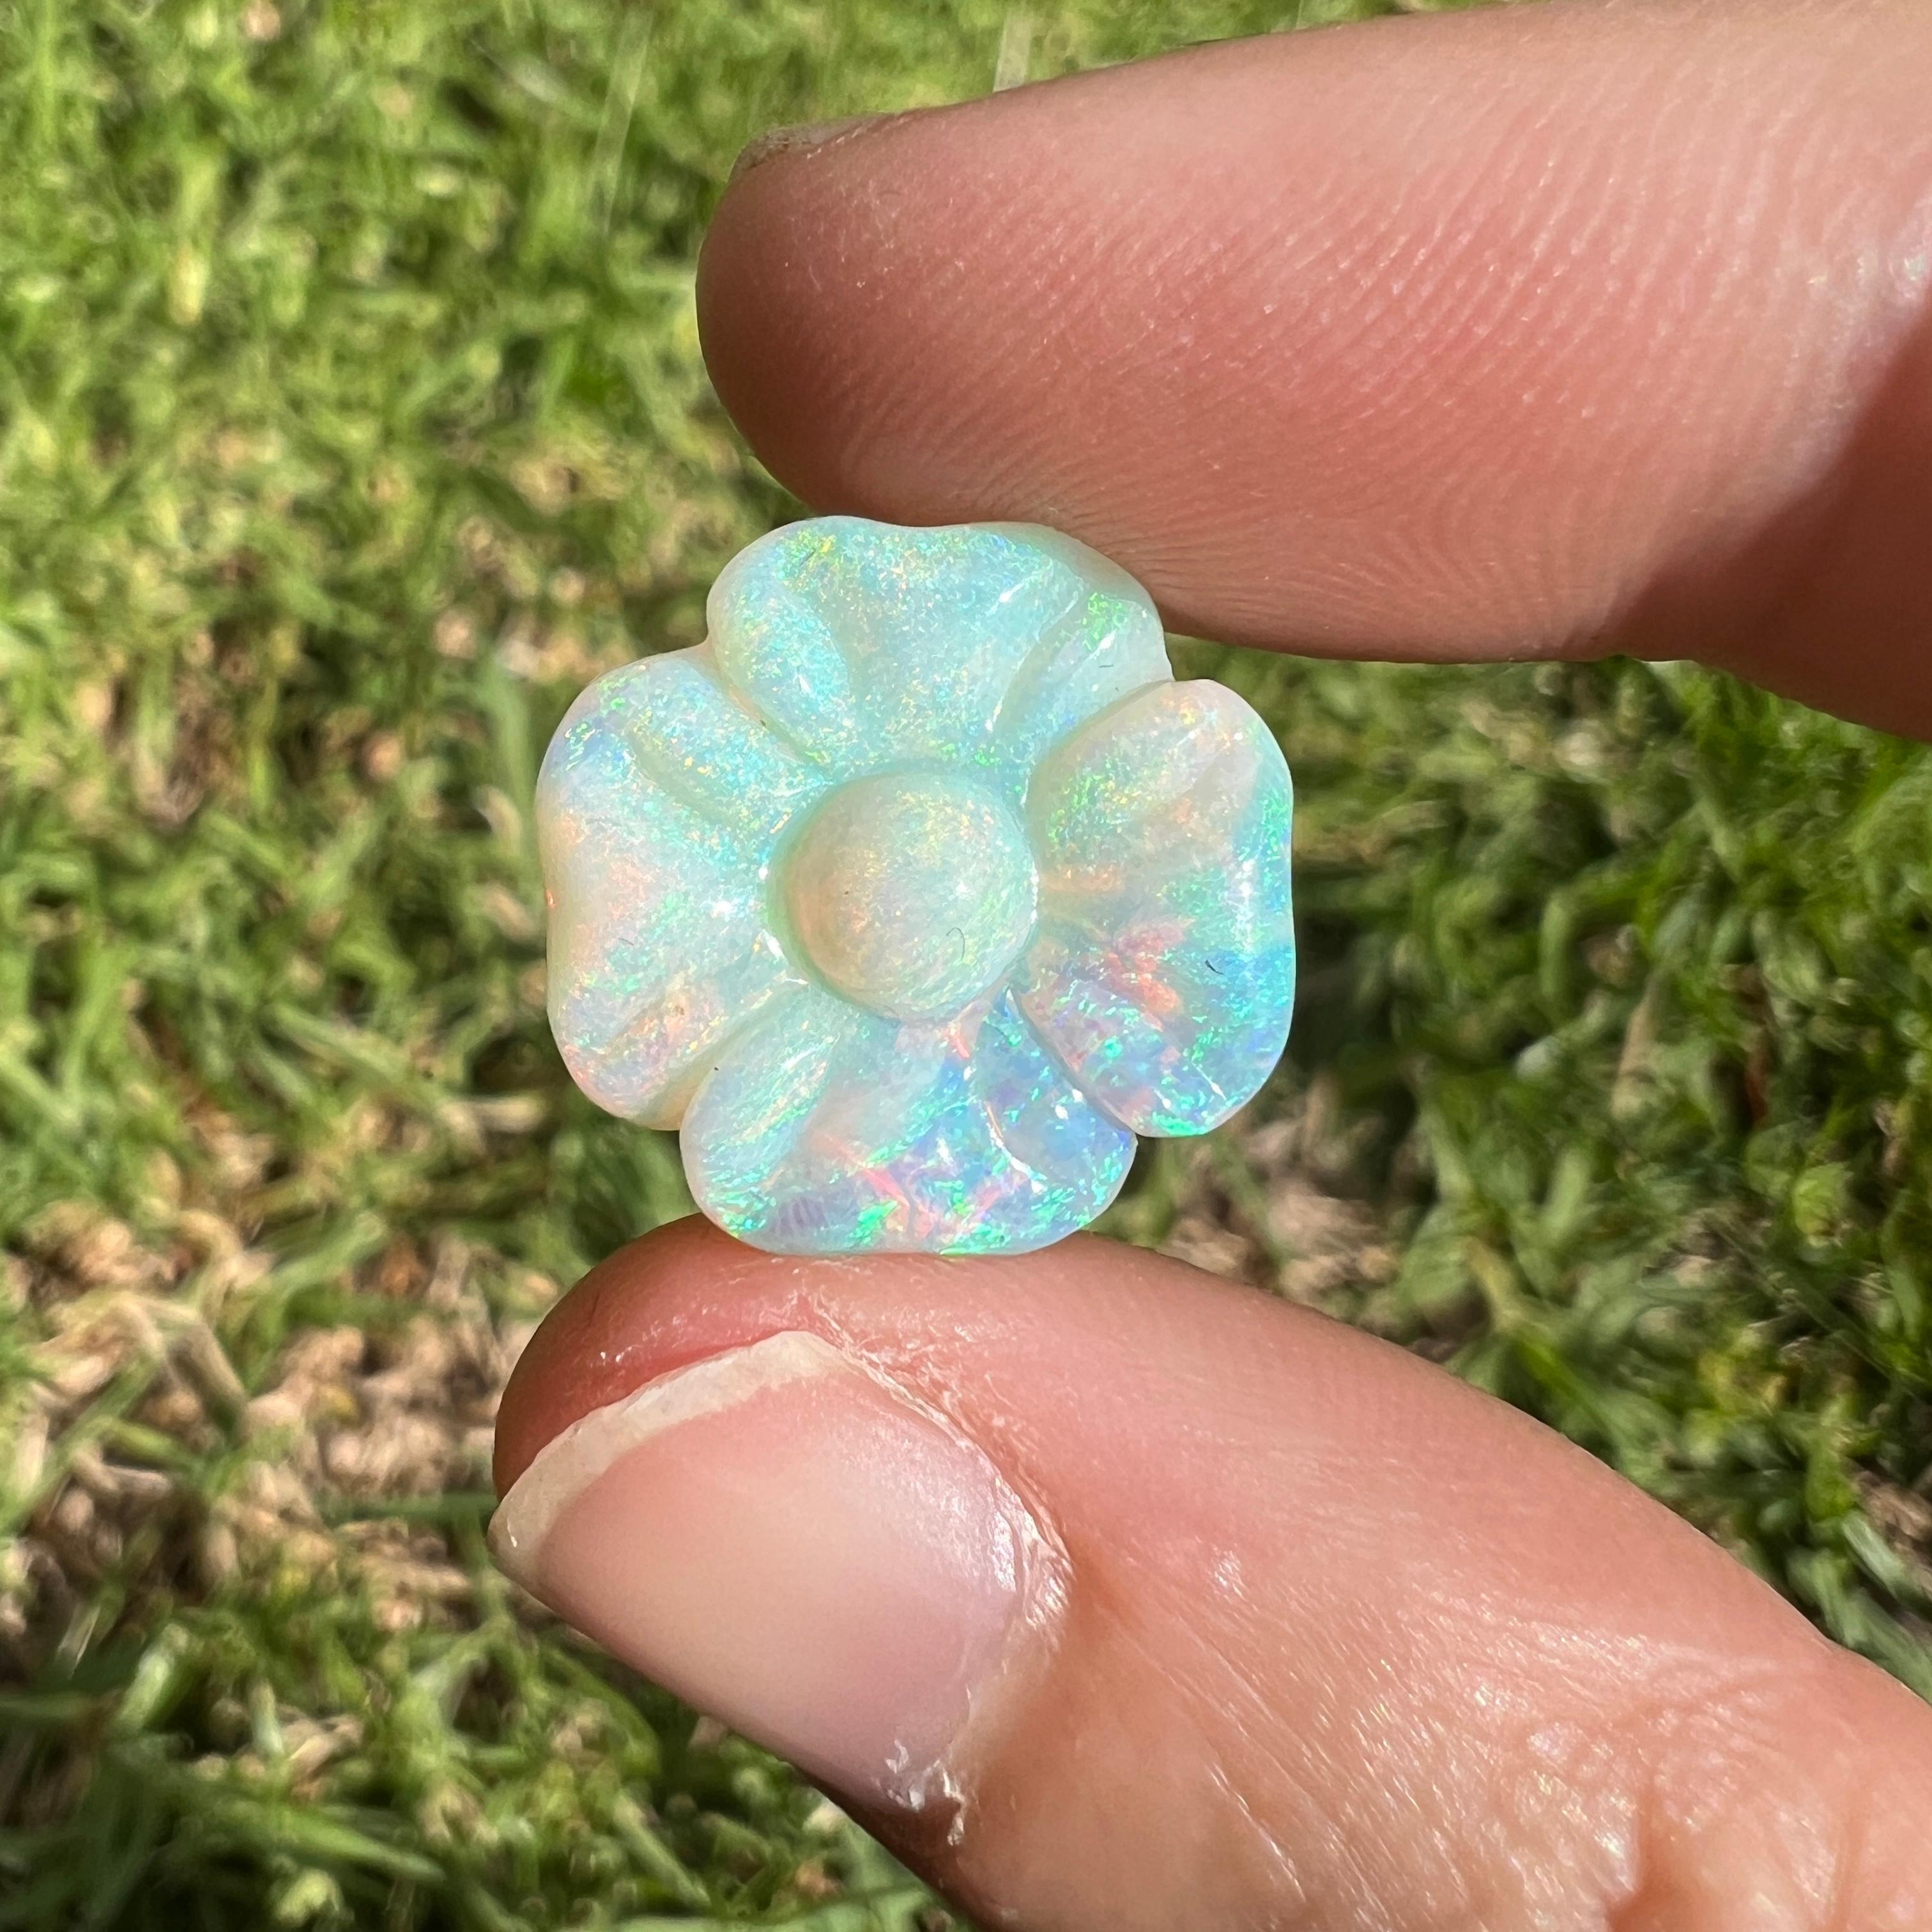 This beautiful 5.95 Ct Australian crystal opal, carved into a flower, is a truly exceptional addition to any collection, mined by Sue Cooper herself. Its rarity, coupled with the amazing carving, captivates connoisseurs with its vibrant rainbow